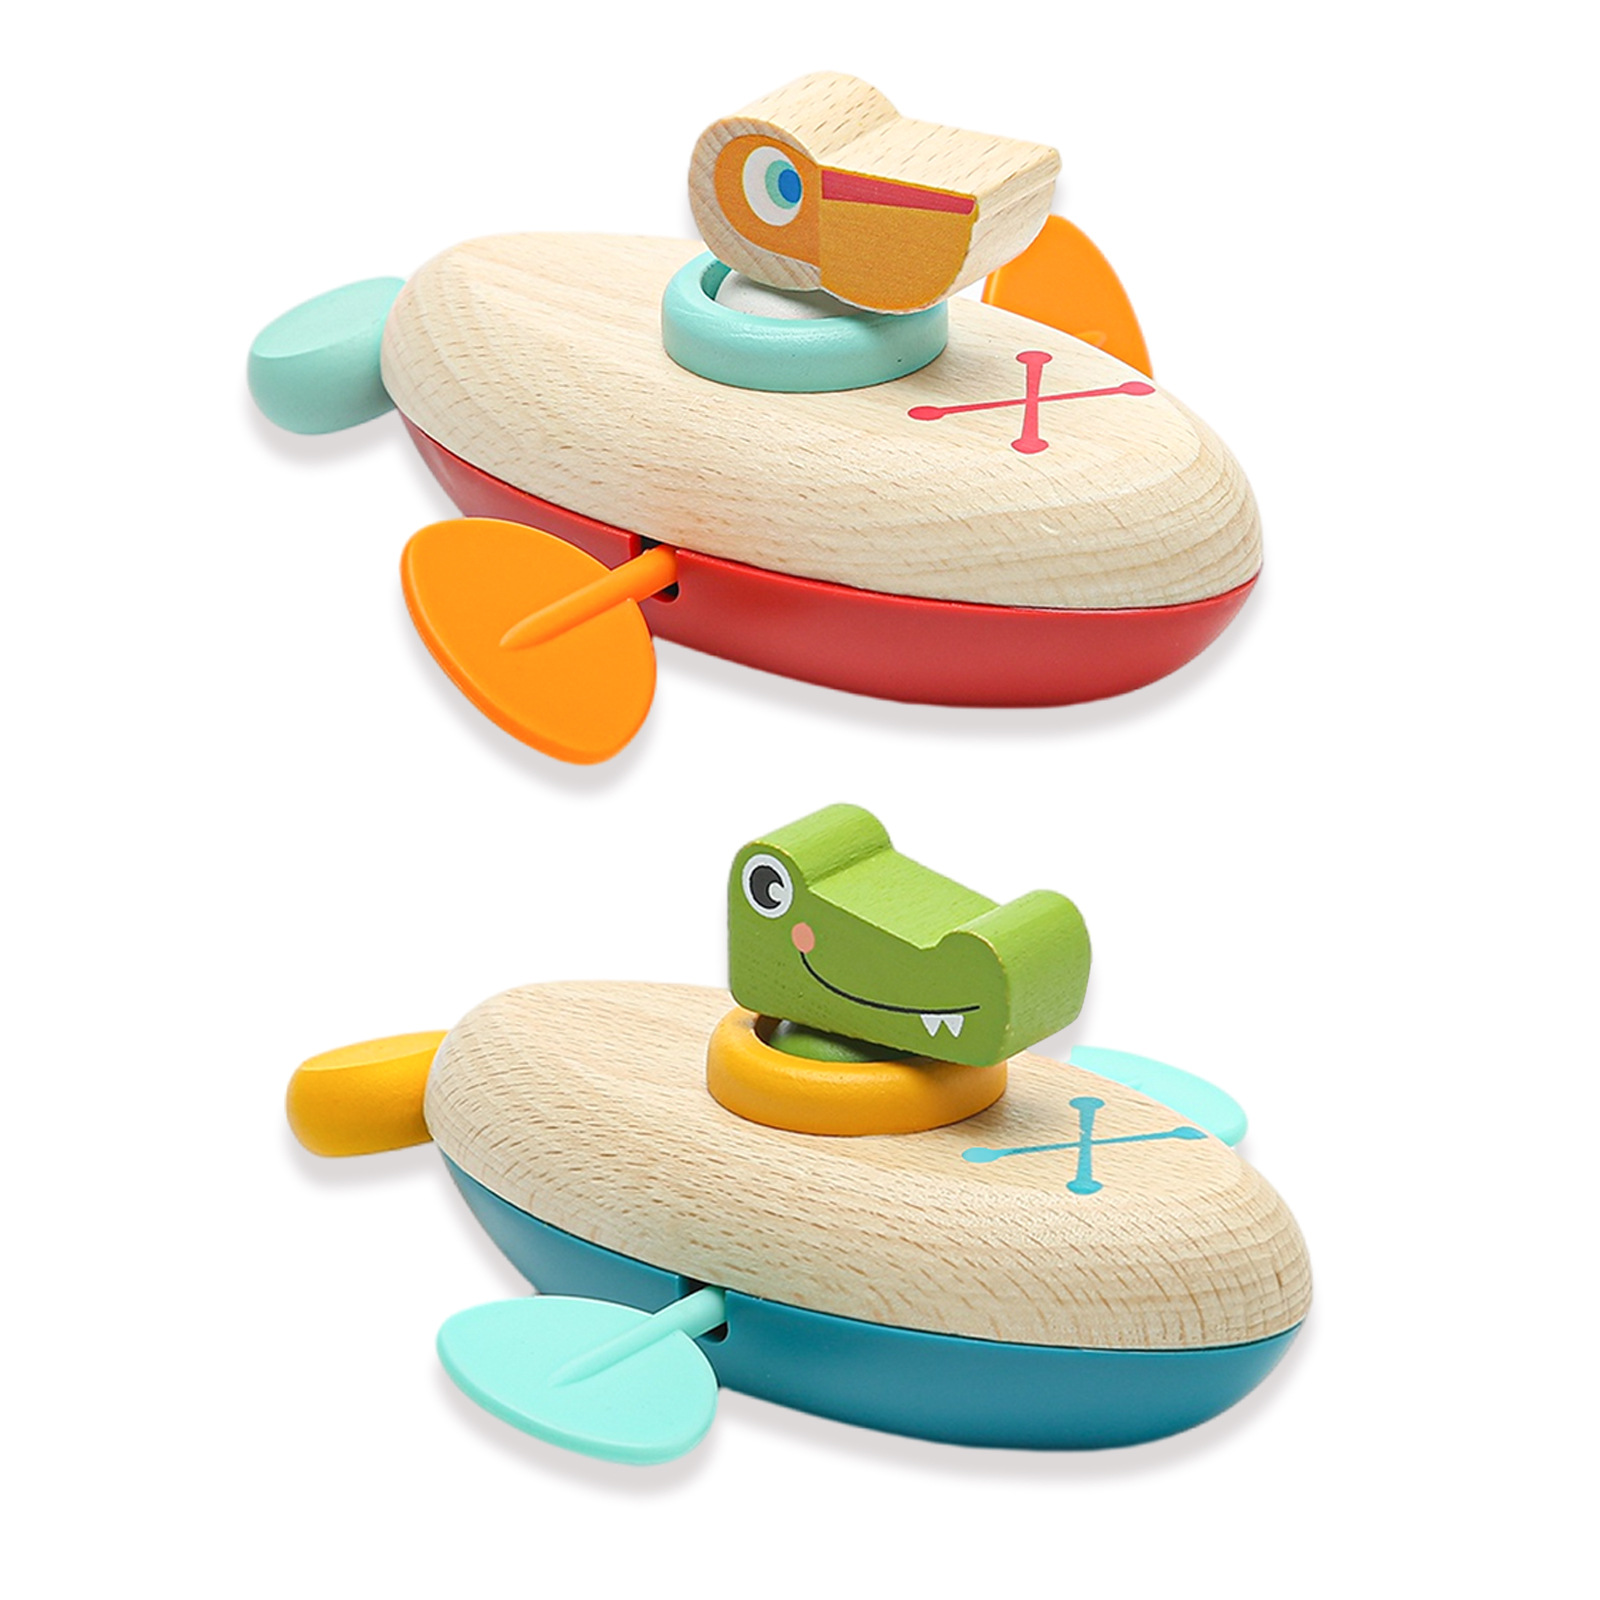 Wooden Sailing Boat With Crocodile Bath And Water Play Toy $6.84